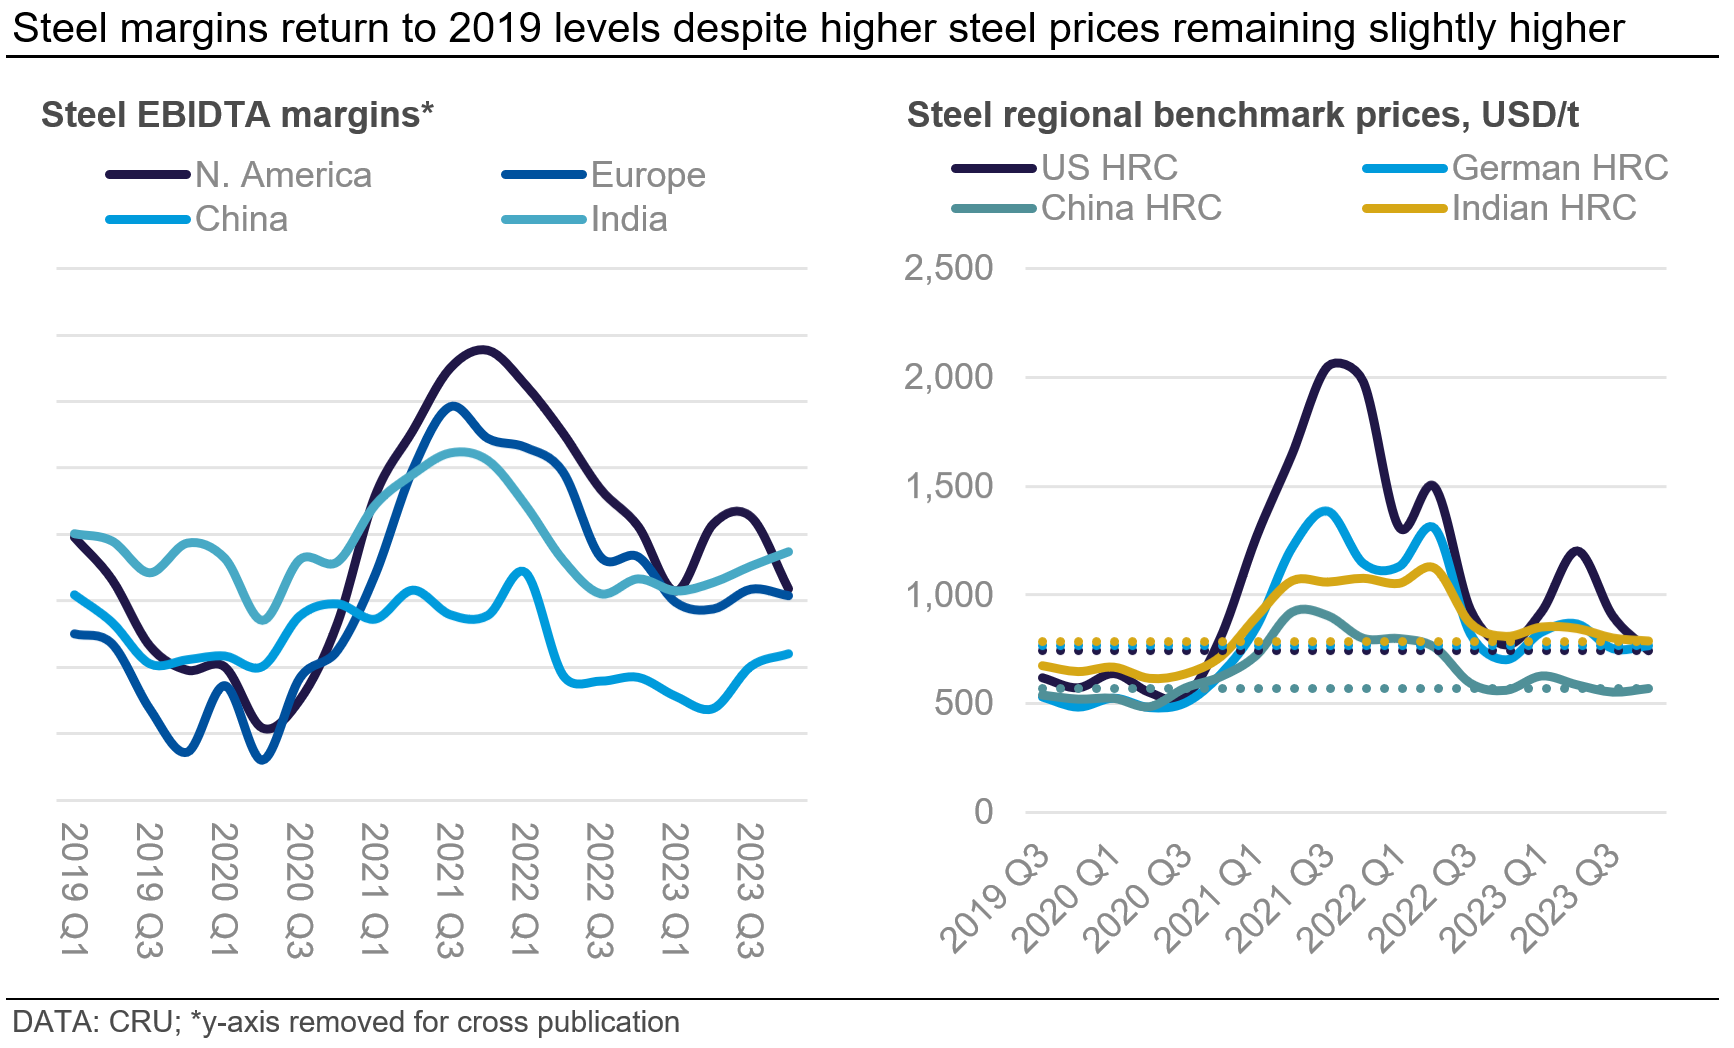 Graph showing that steel margins return to 2019 levels despite higher steel prices remaining slightly higher